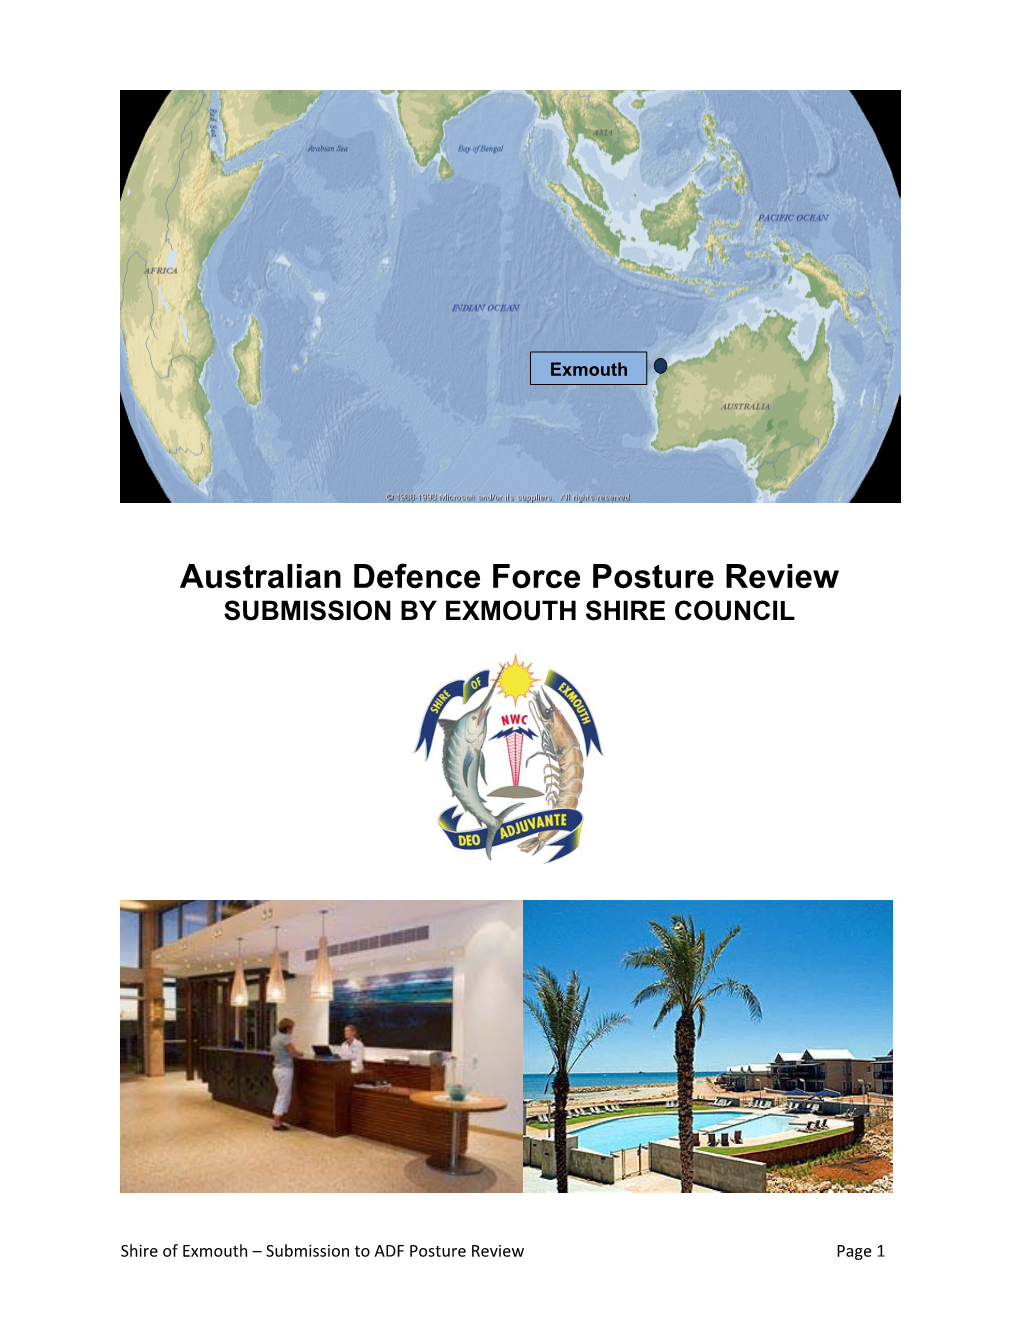 Australian Defence Force Posture Review SUBMISSION by EXMOUTH SHIRE COUNCIL